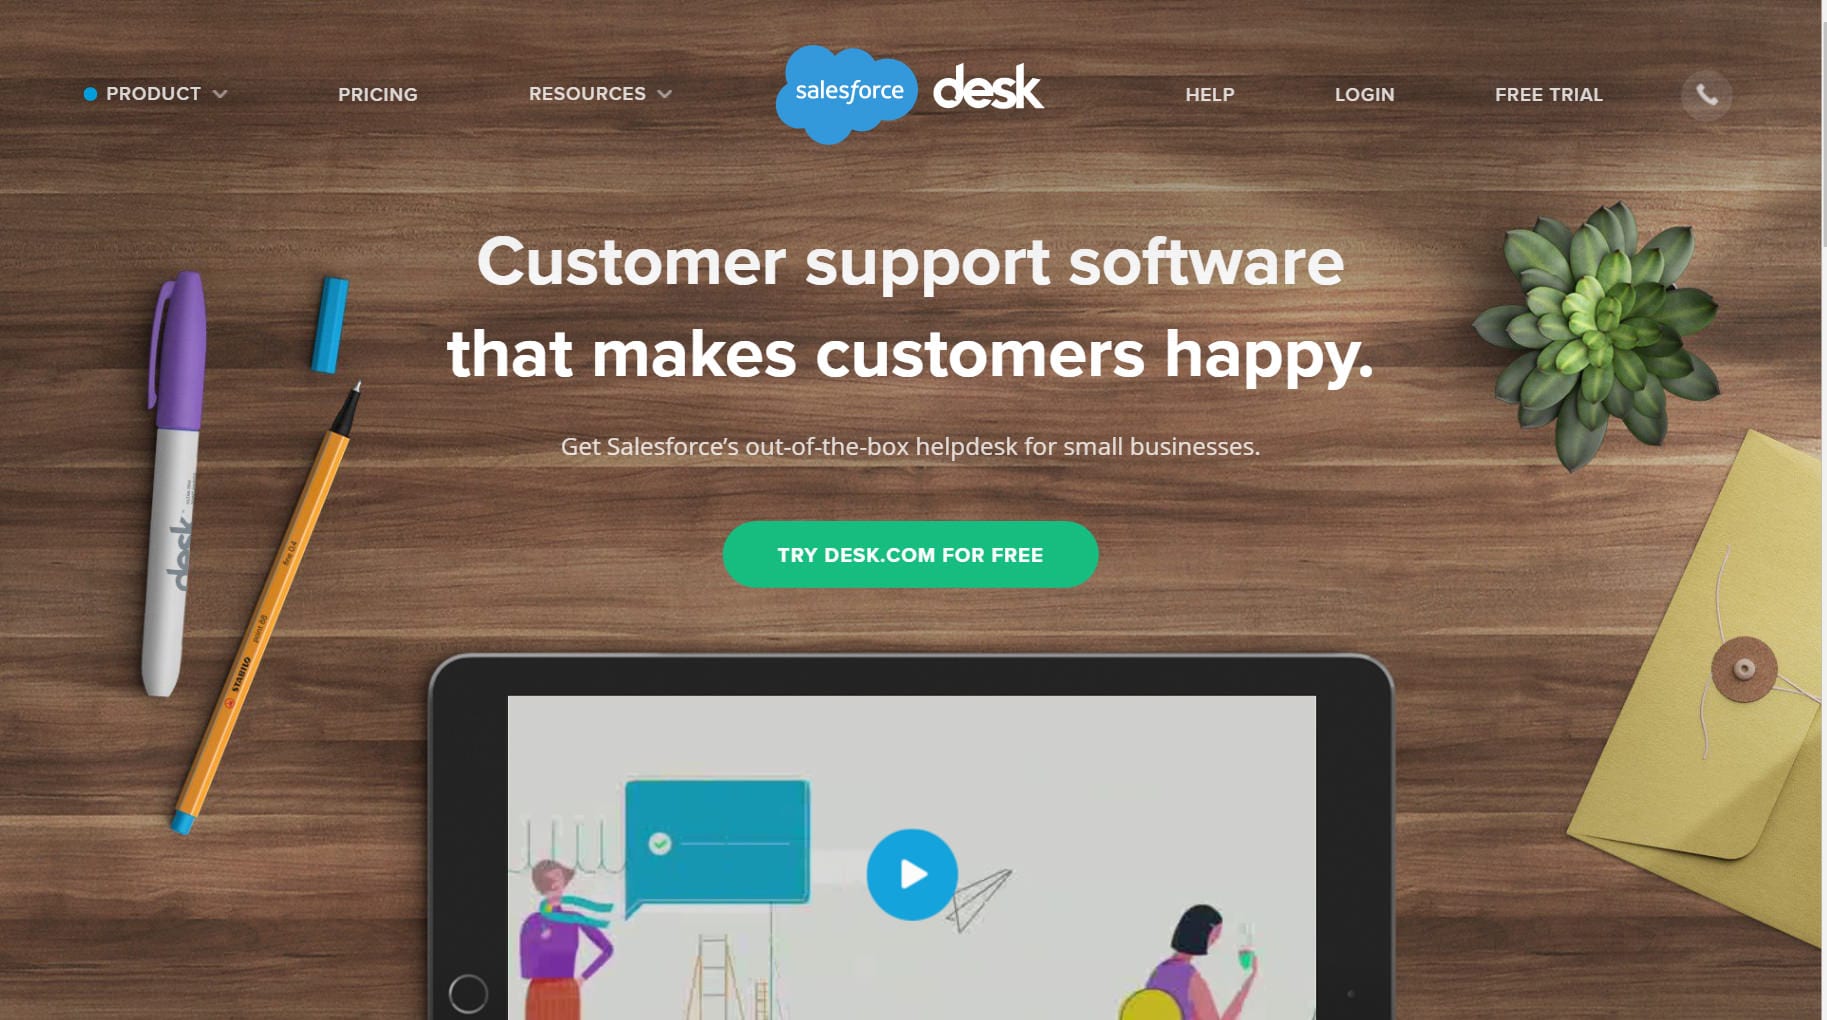 Screen Capture: Salesforce Desk. Customer support software that makes customers happy. Get salesforce out-of-the-box helpdesk for small businesses. Try desk.com for free.